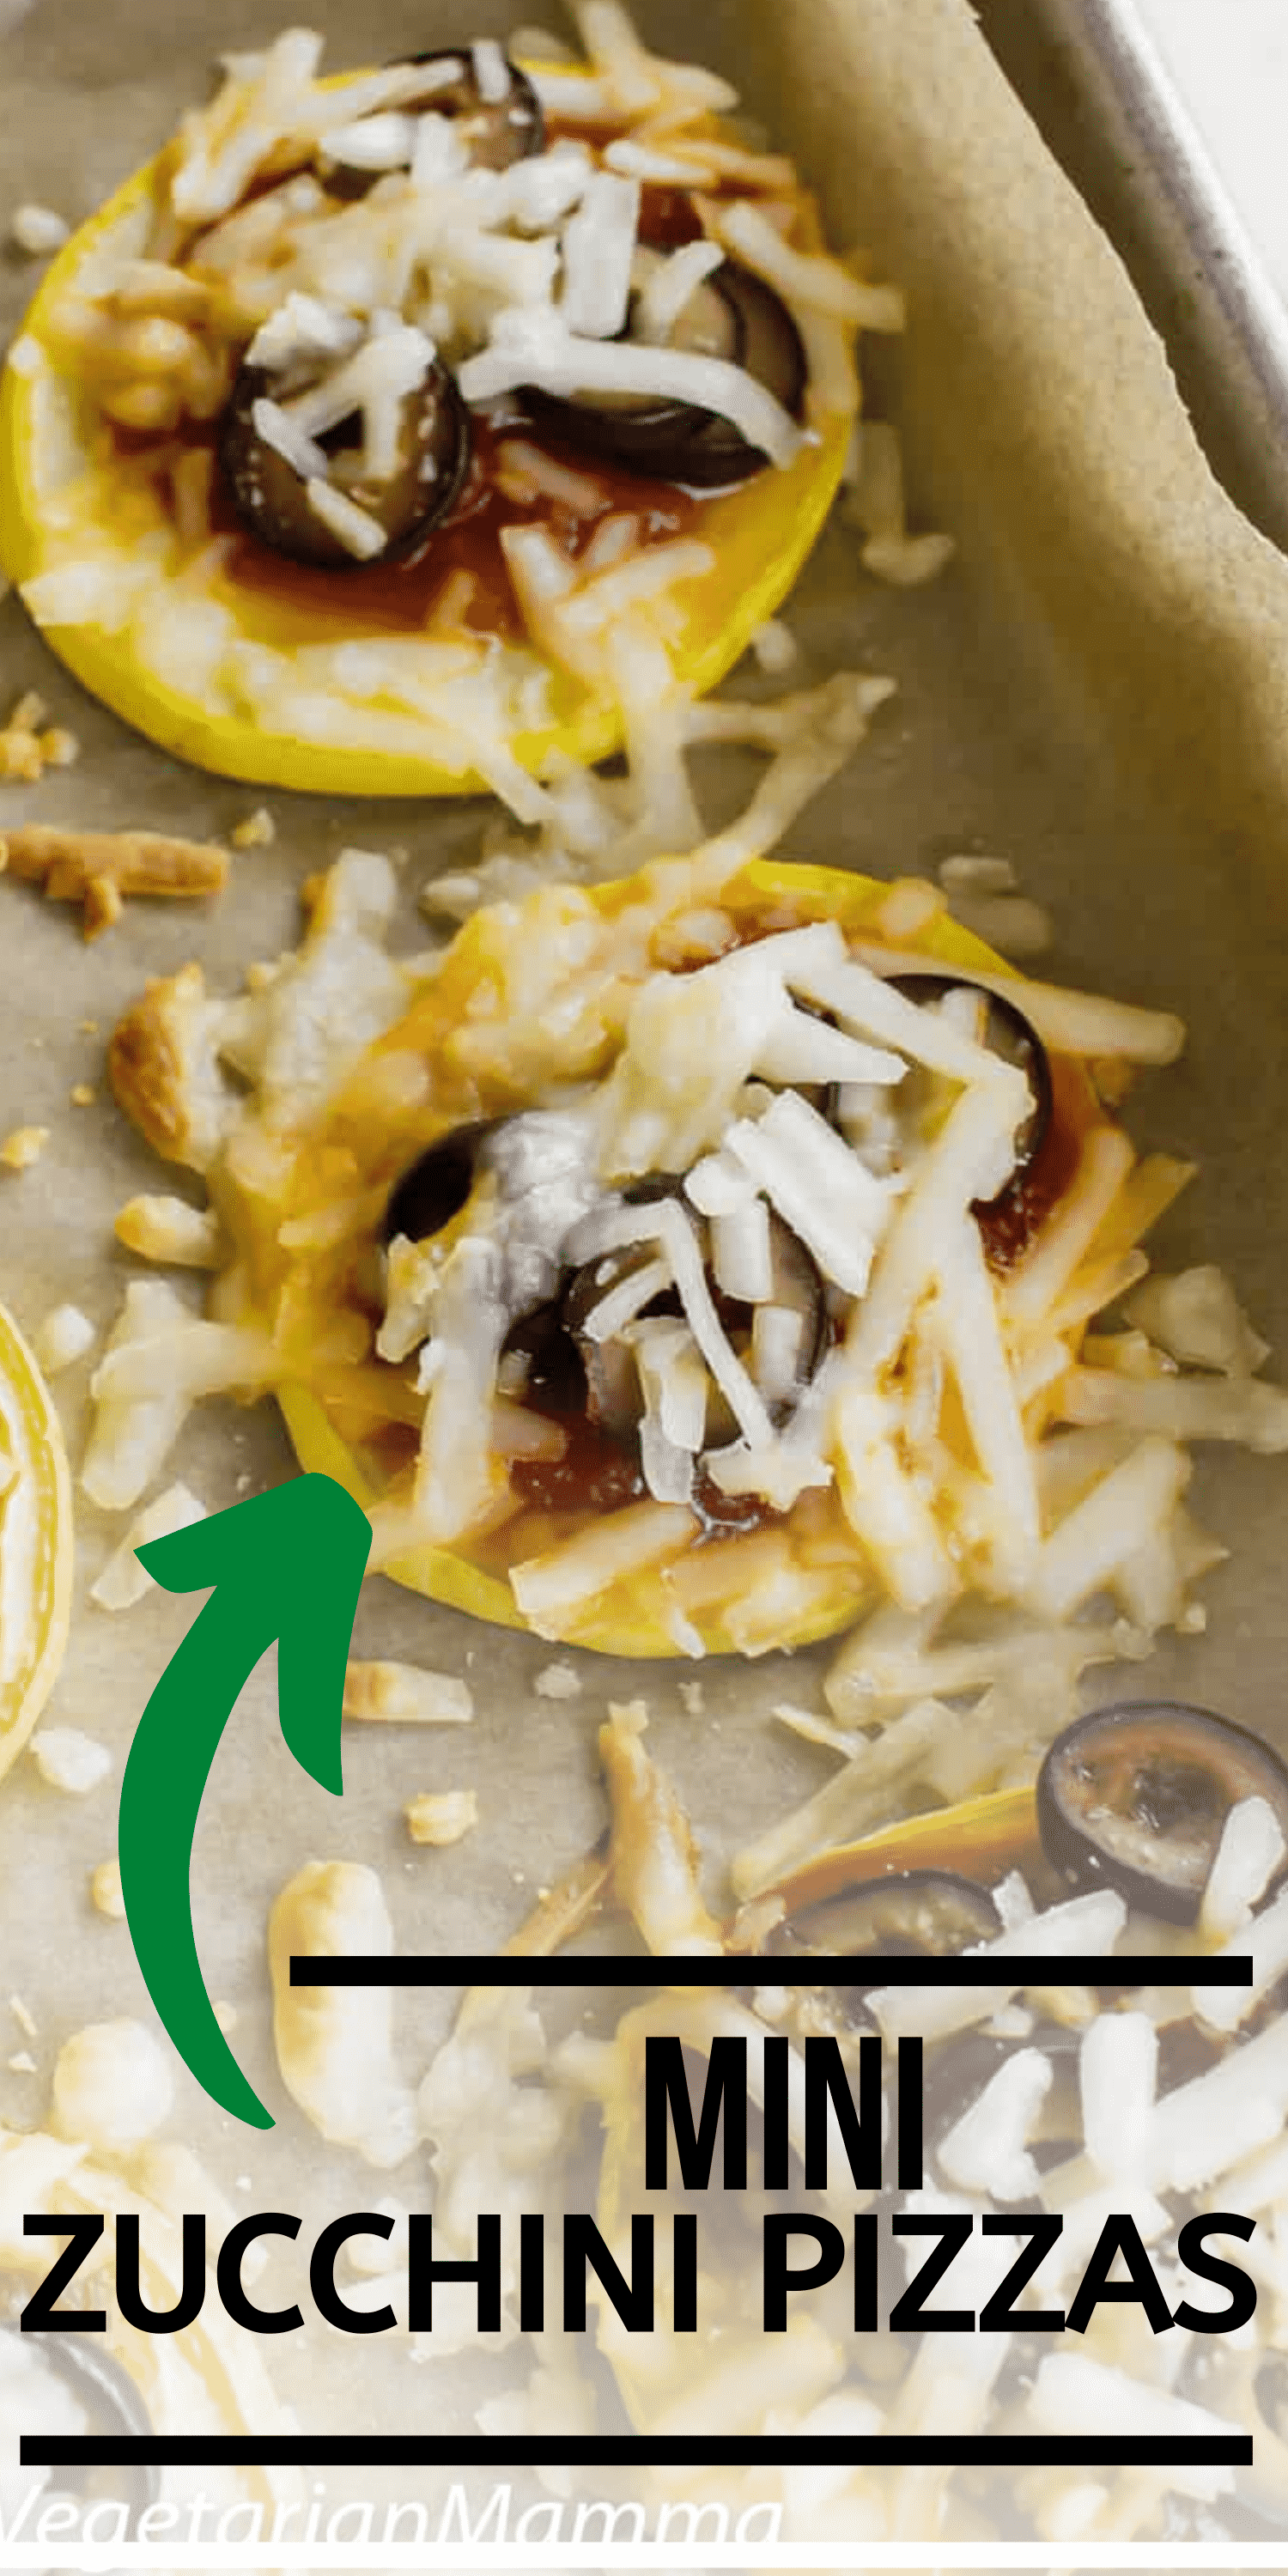 Looking for a fun and easy snack? These mini zucchini pizzas are easy to make and fun to customize! #zucchini